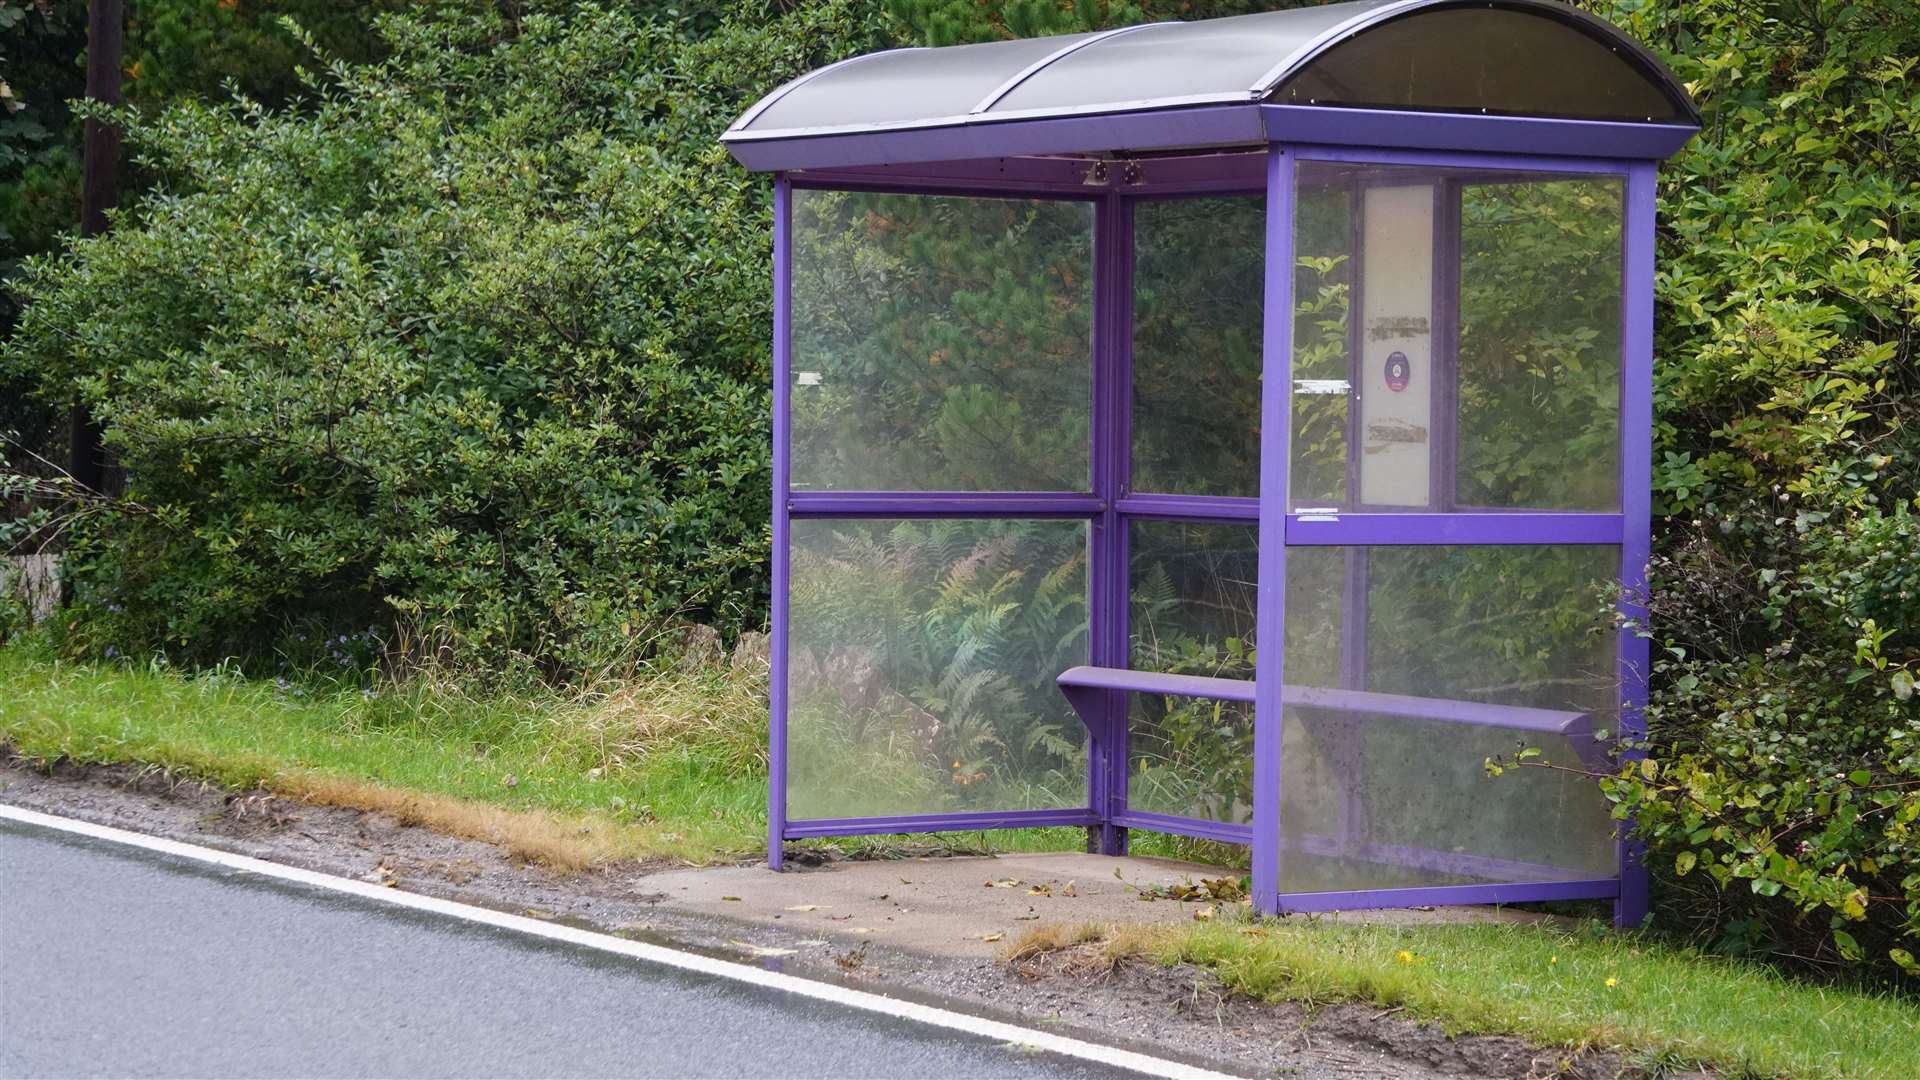 Bus shelter which local kids use for heading to school. Mr Rowan says there are dangers in crossing the road to it.